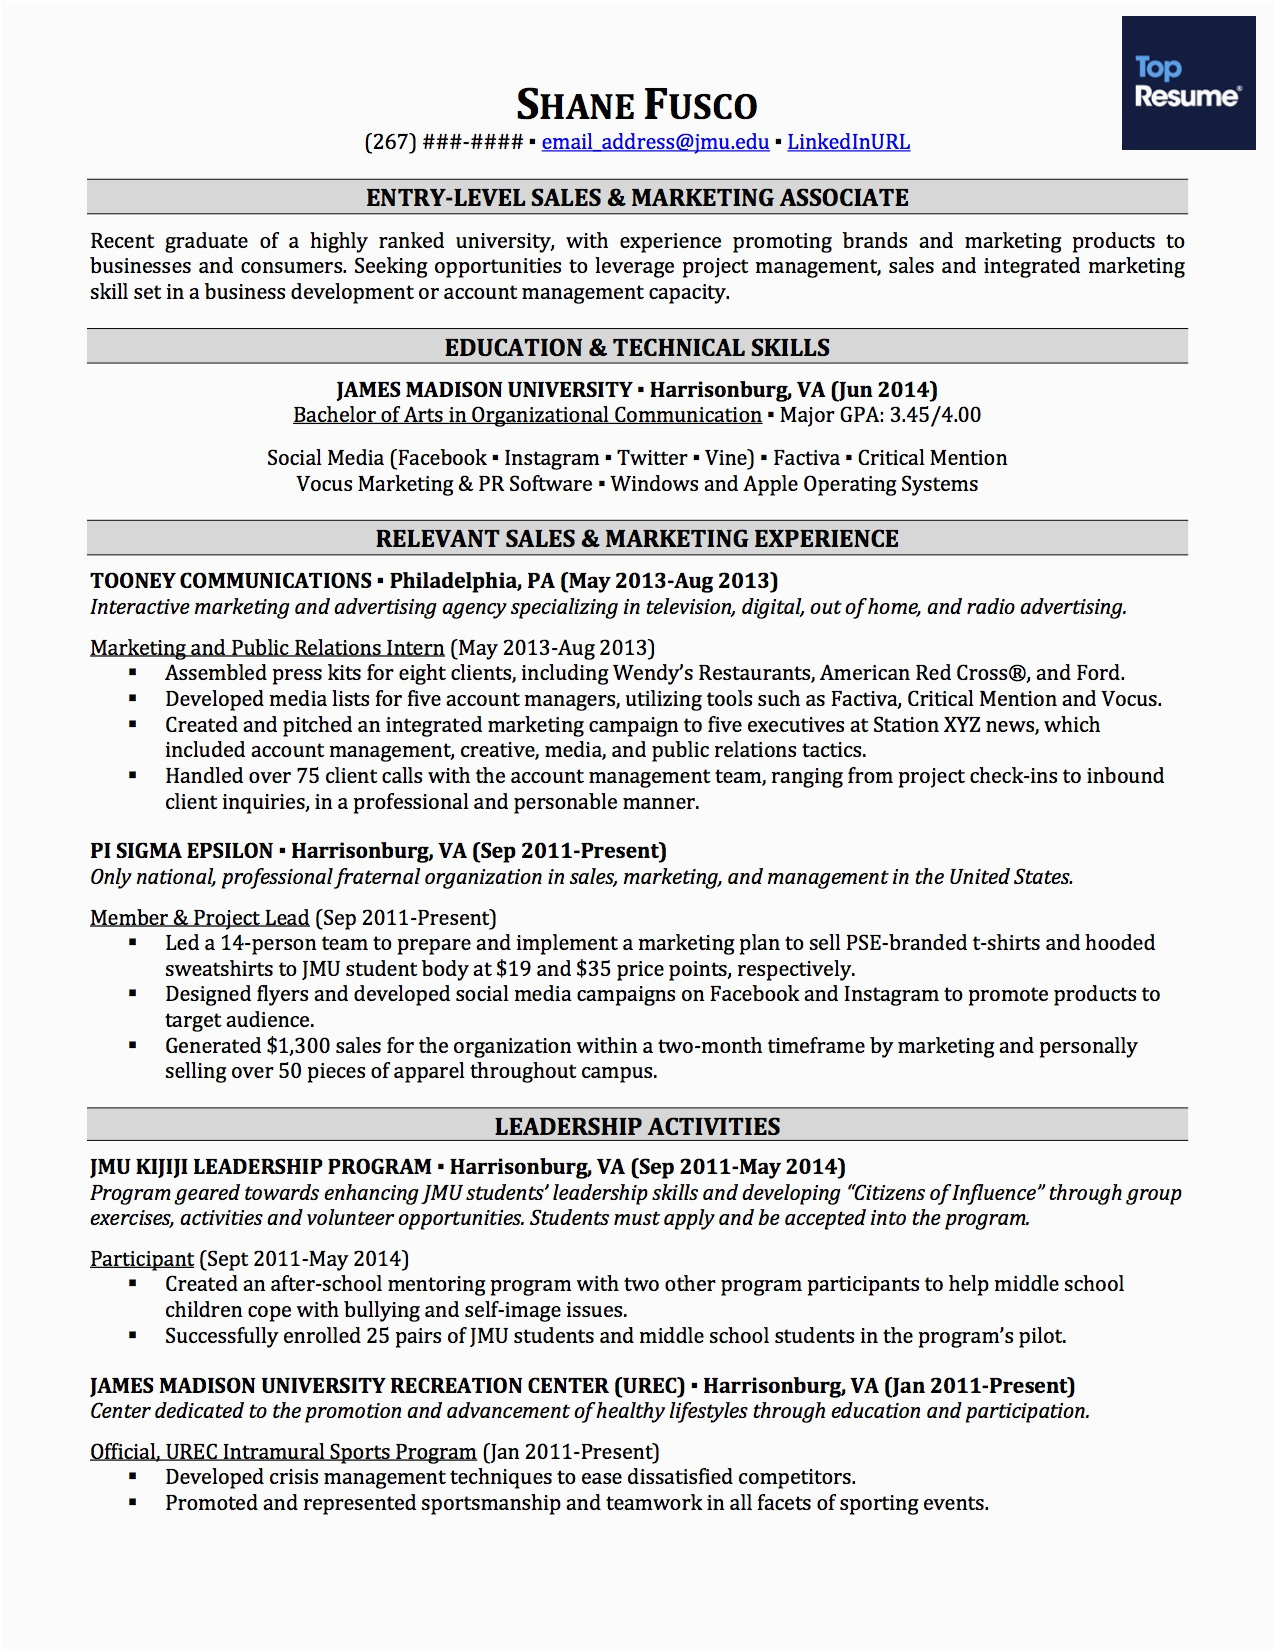 Sample Resume for College Student No Work Experience How to Make A Resume with No Experience